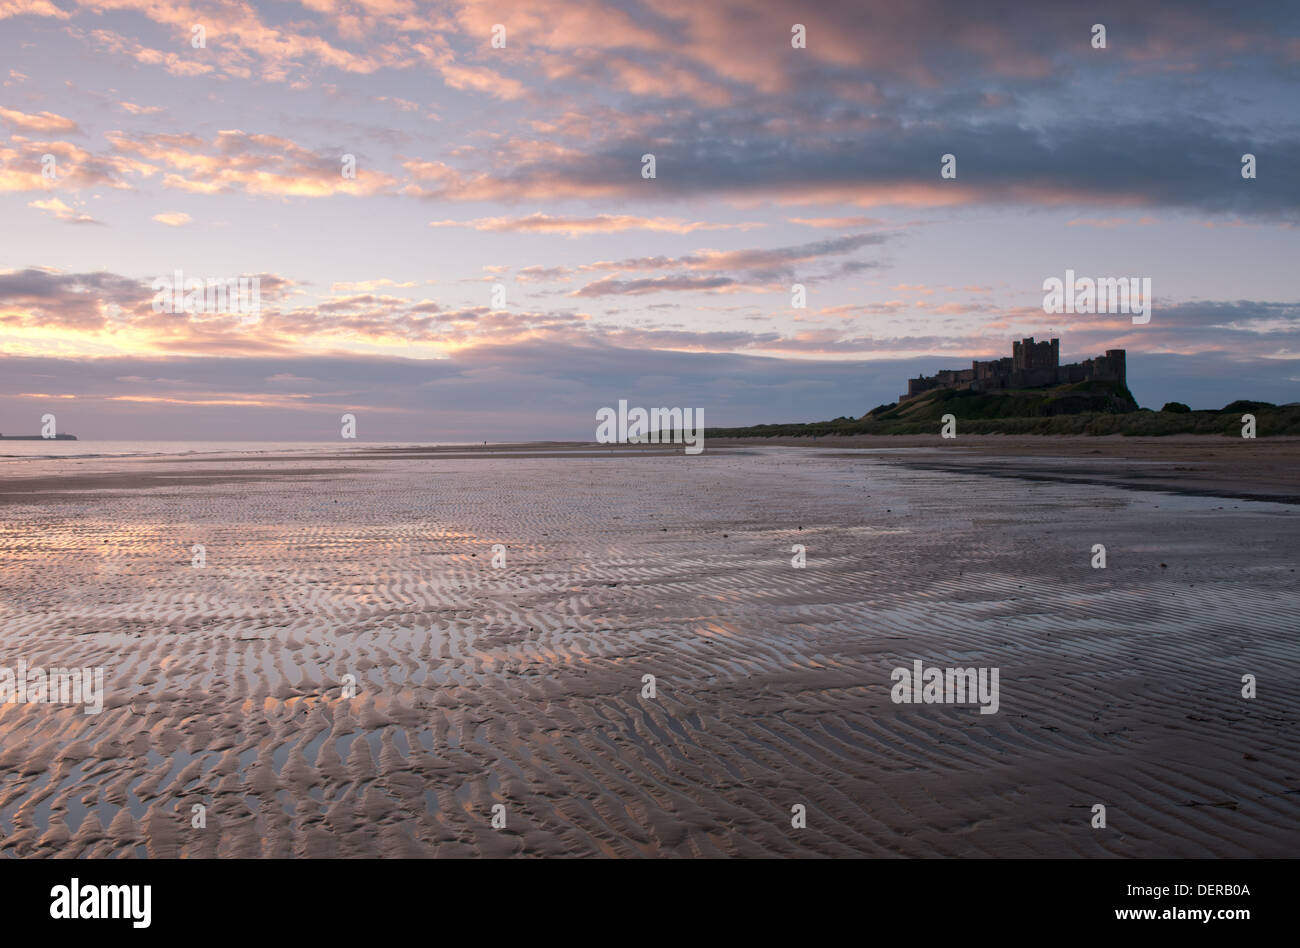 Bamburgh Castle and the beach at dawn in Bamburgh, Northumberland, UK Stock Photo